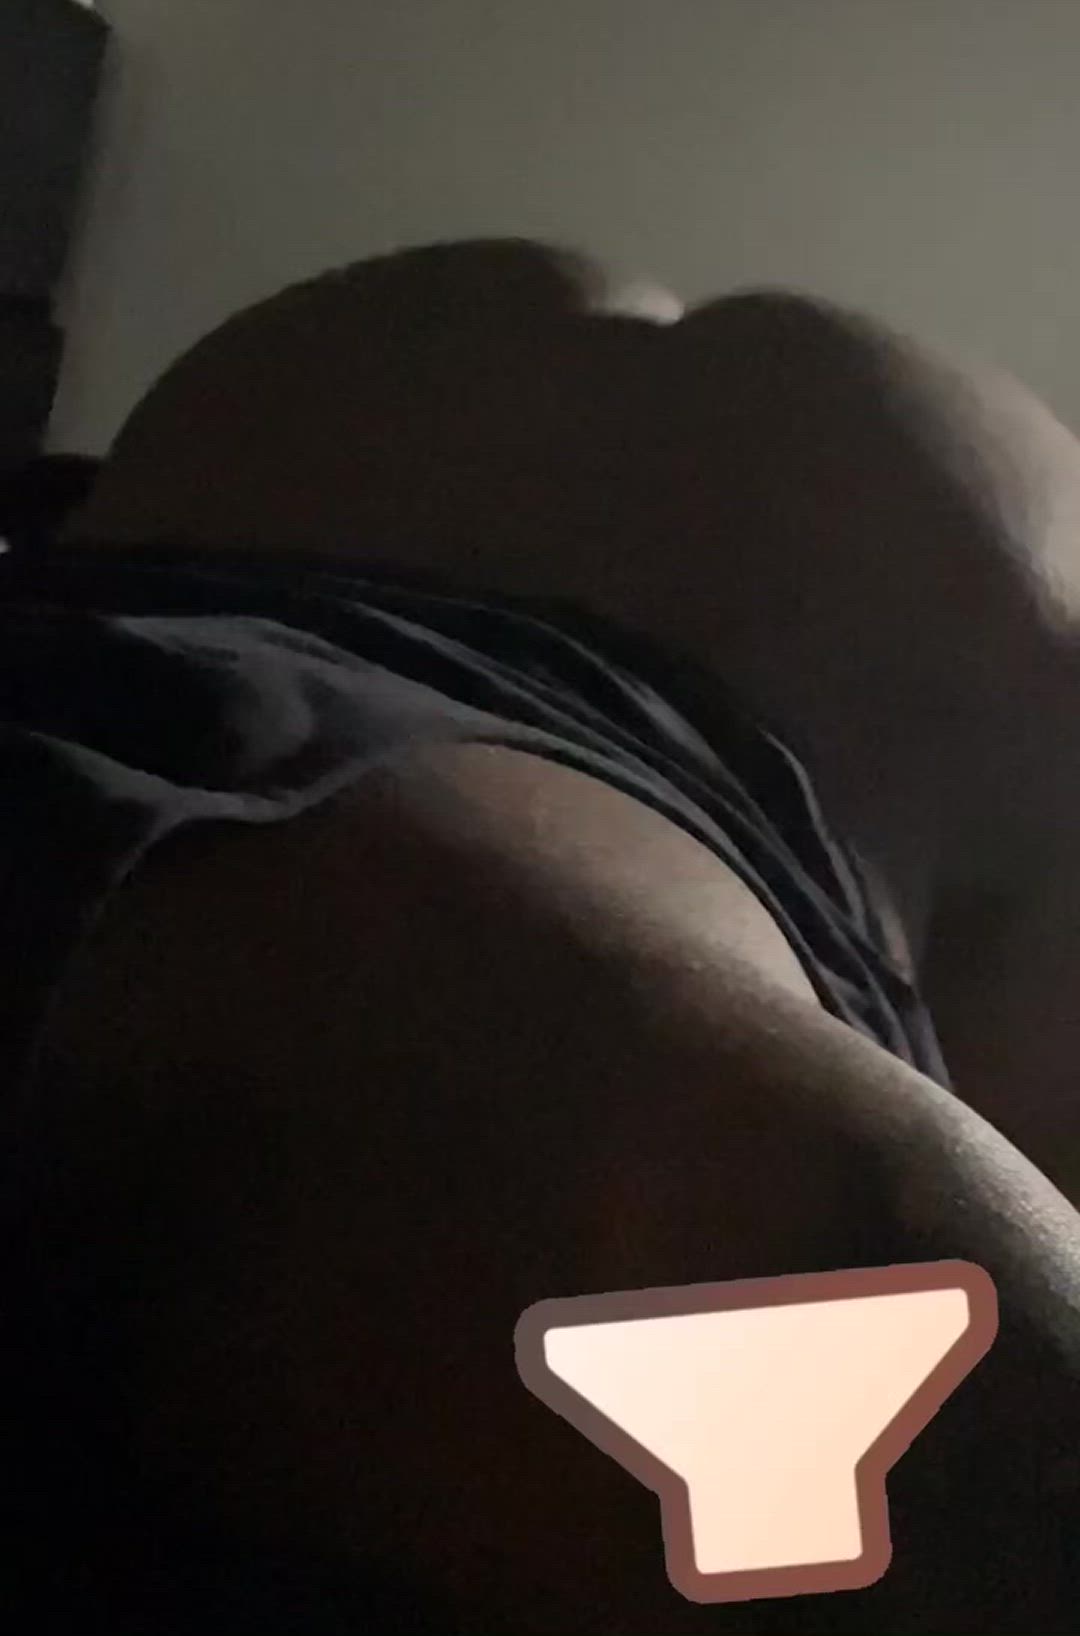 Ass porn video with onlyfans model Zaddy <strong>@daddyzaddyz</strong>